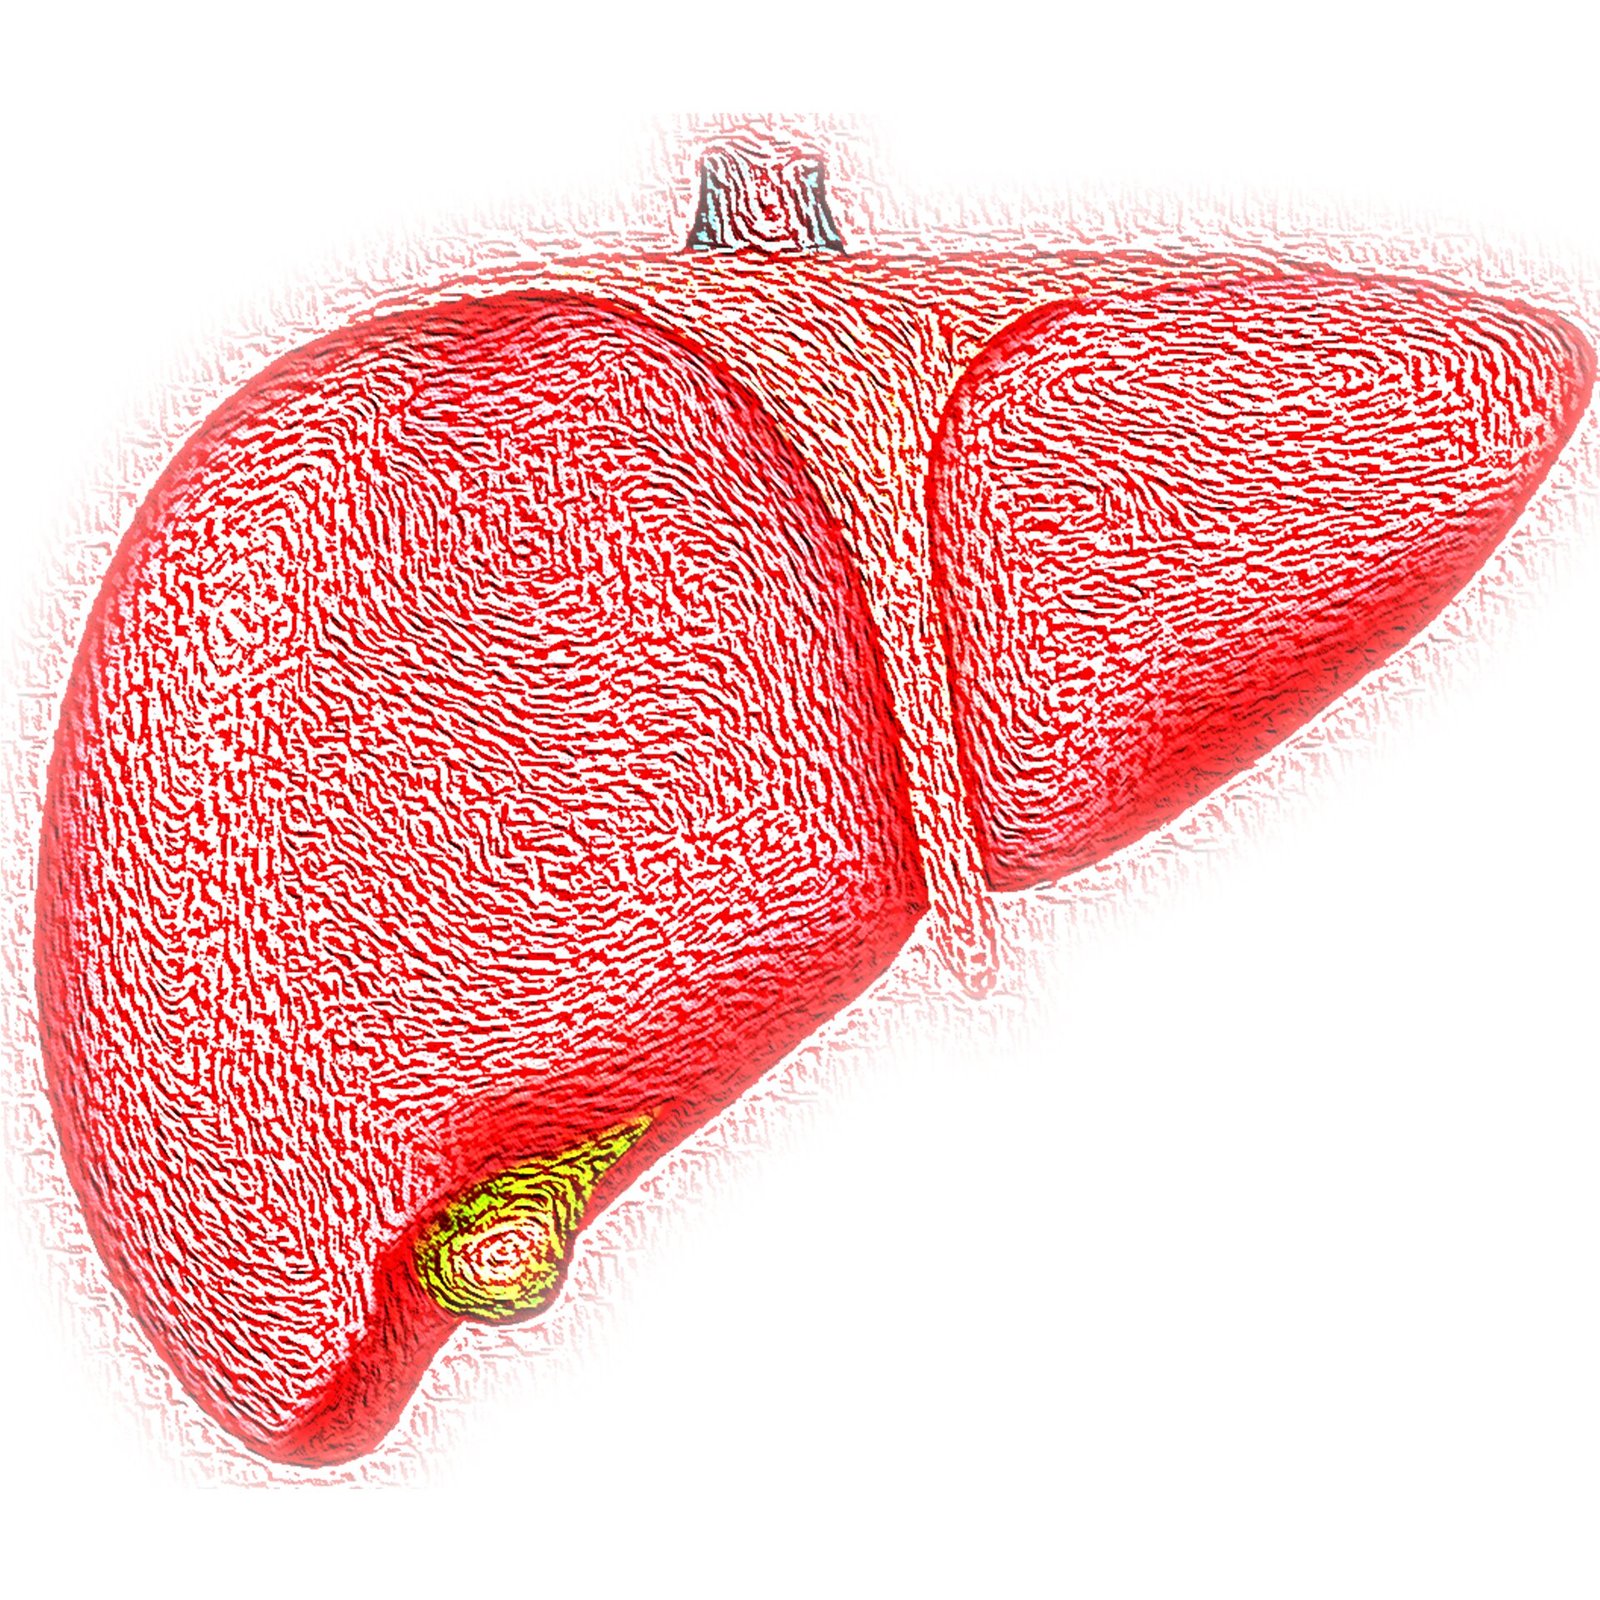 Study of cancer-induced liver inflammation finds a promising therapeutic target